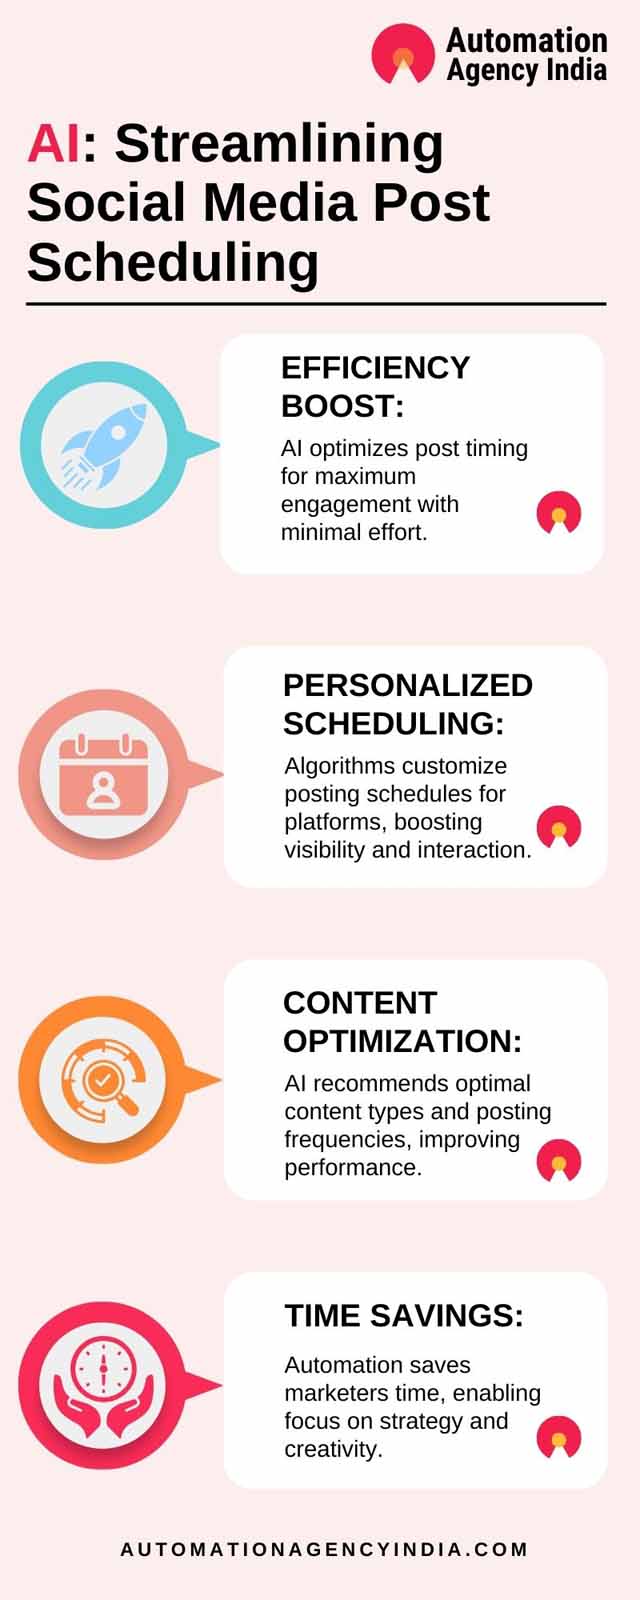 Infographic on AI: Streamlining Social Media Post Scheduling